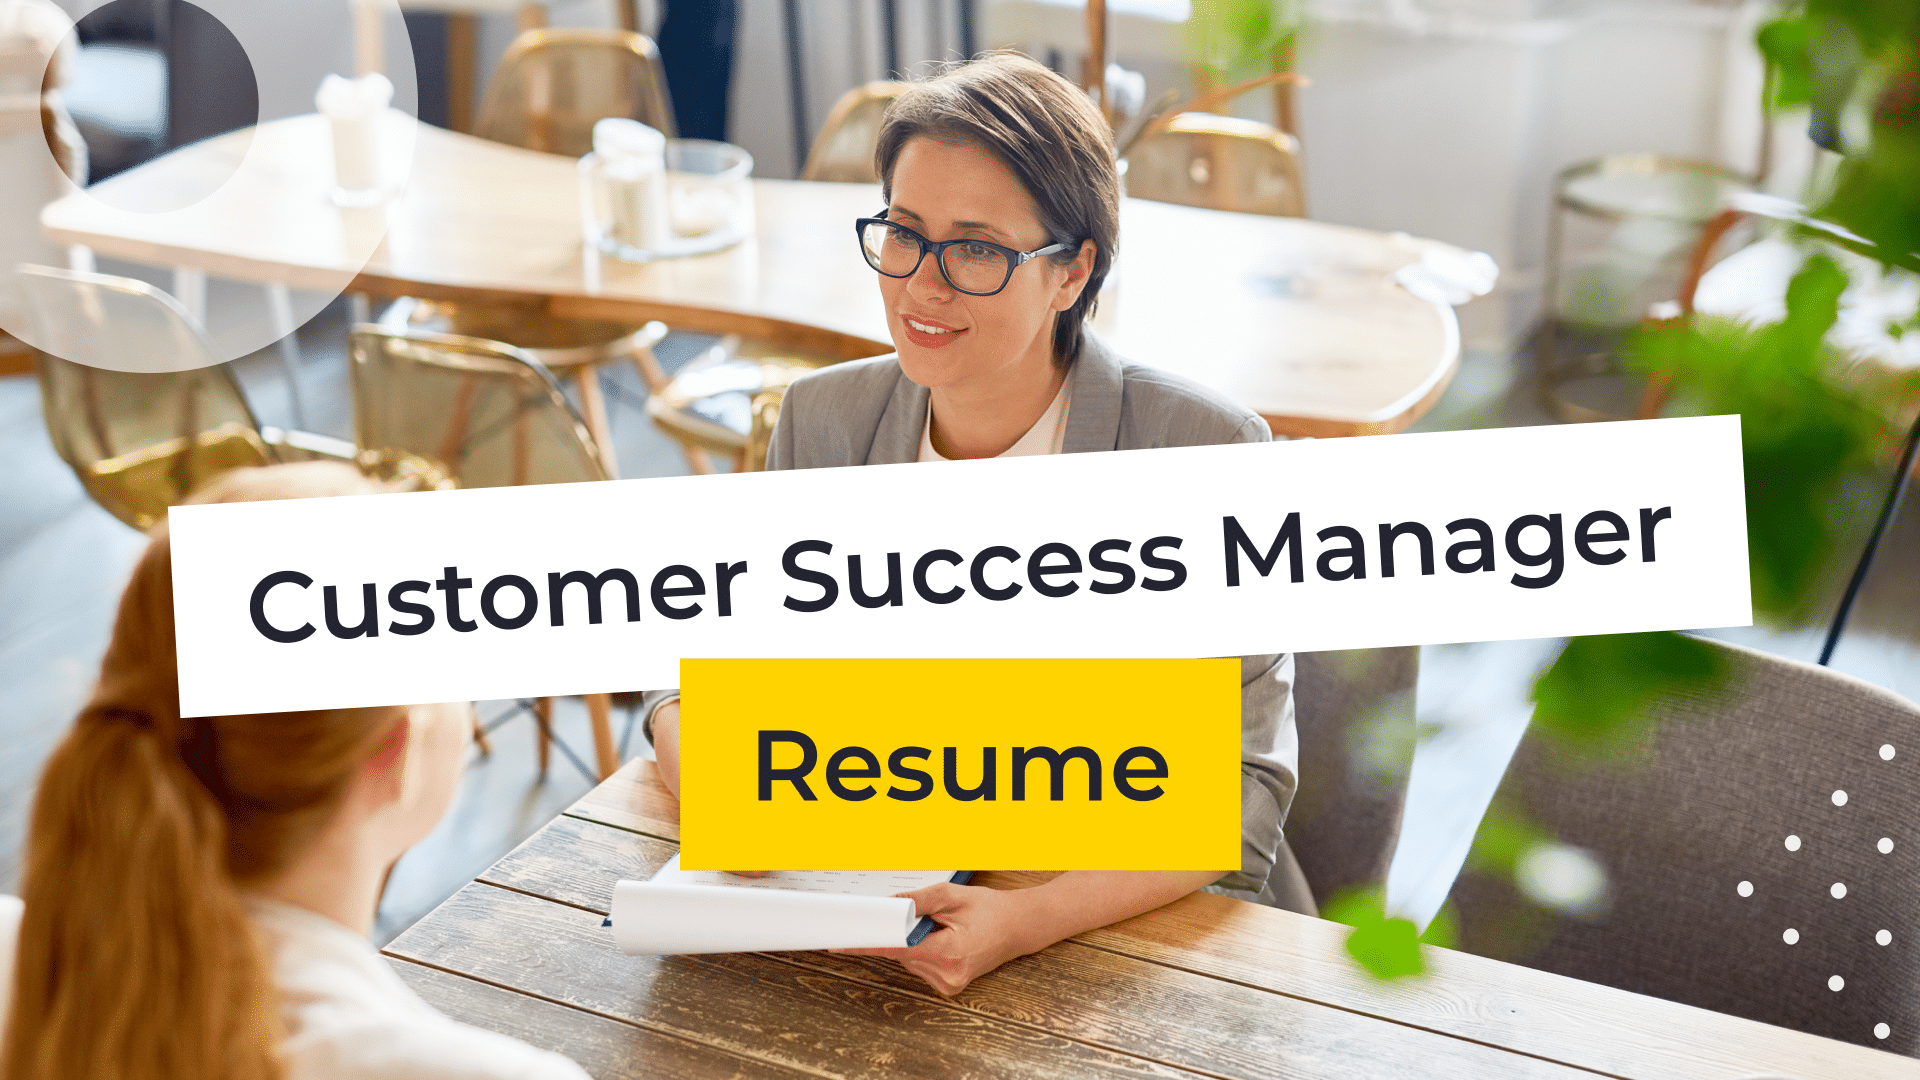 How To Write A Top Customer Success Manager Resume